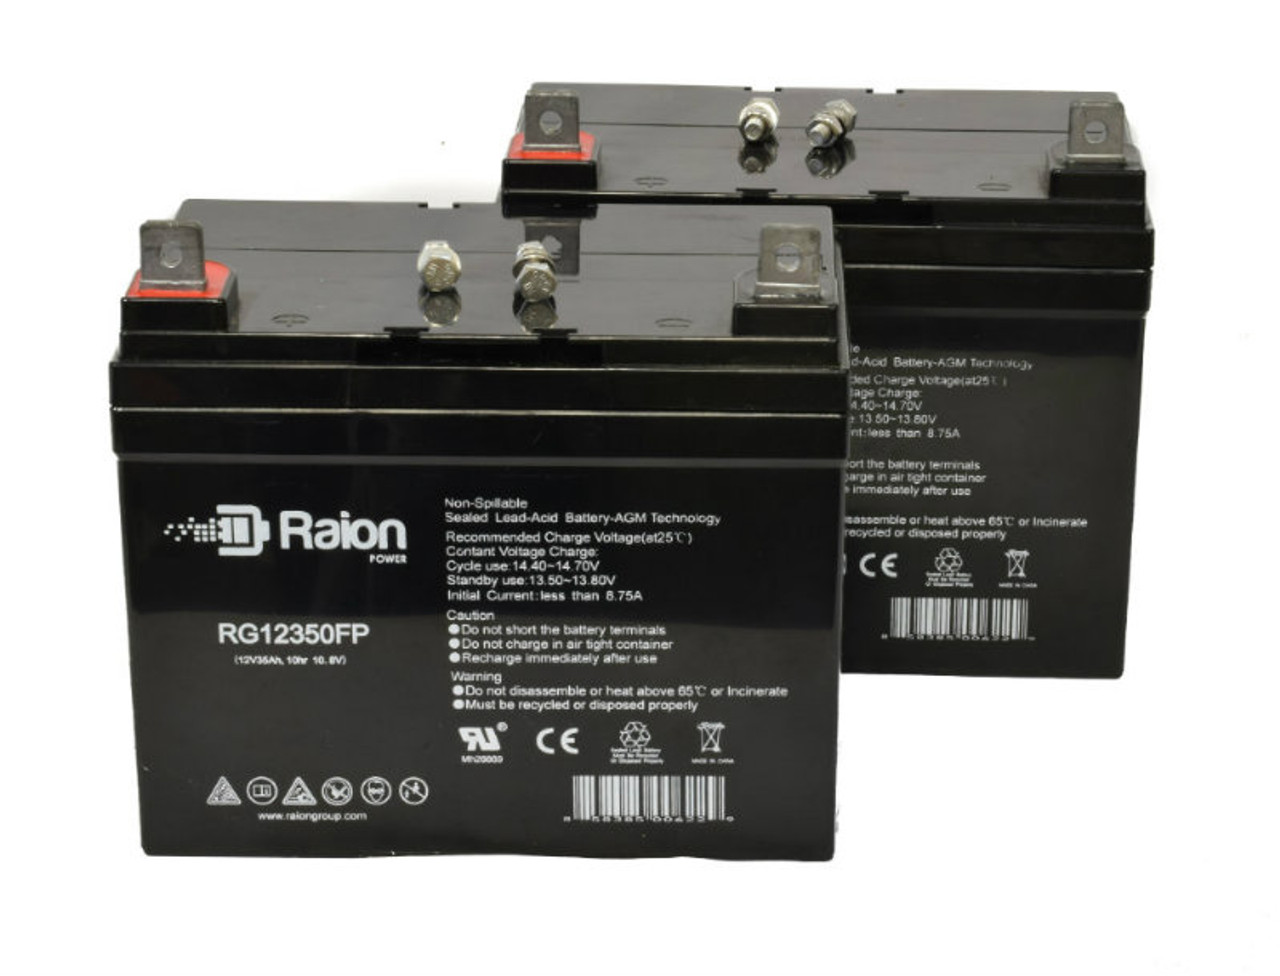 Raion Power Replacement 12V 35Ah Lawn Mower Battery for Kubota 2515H - 2 Pack